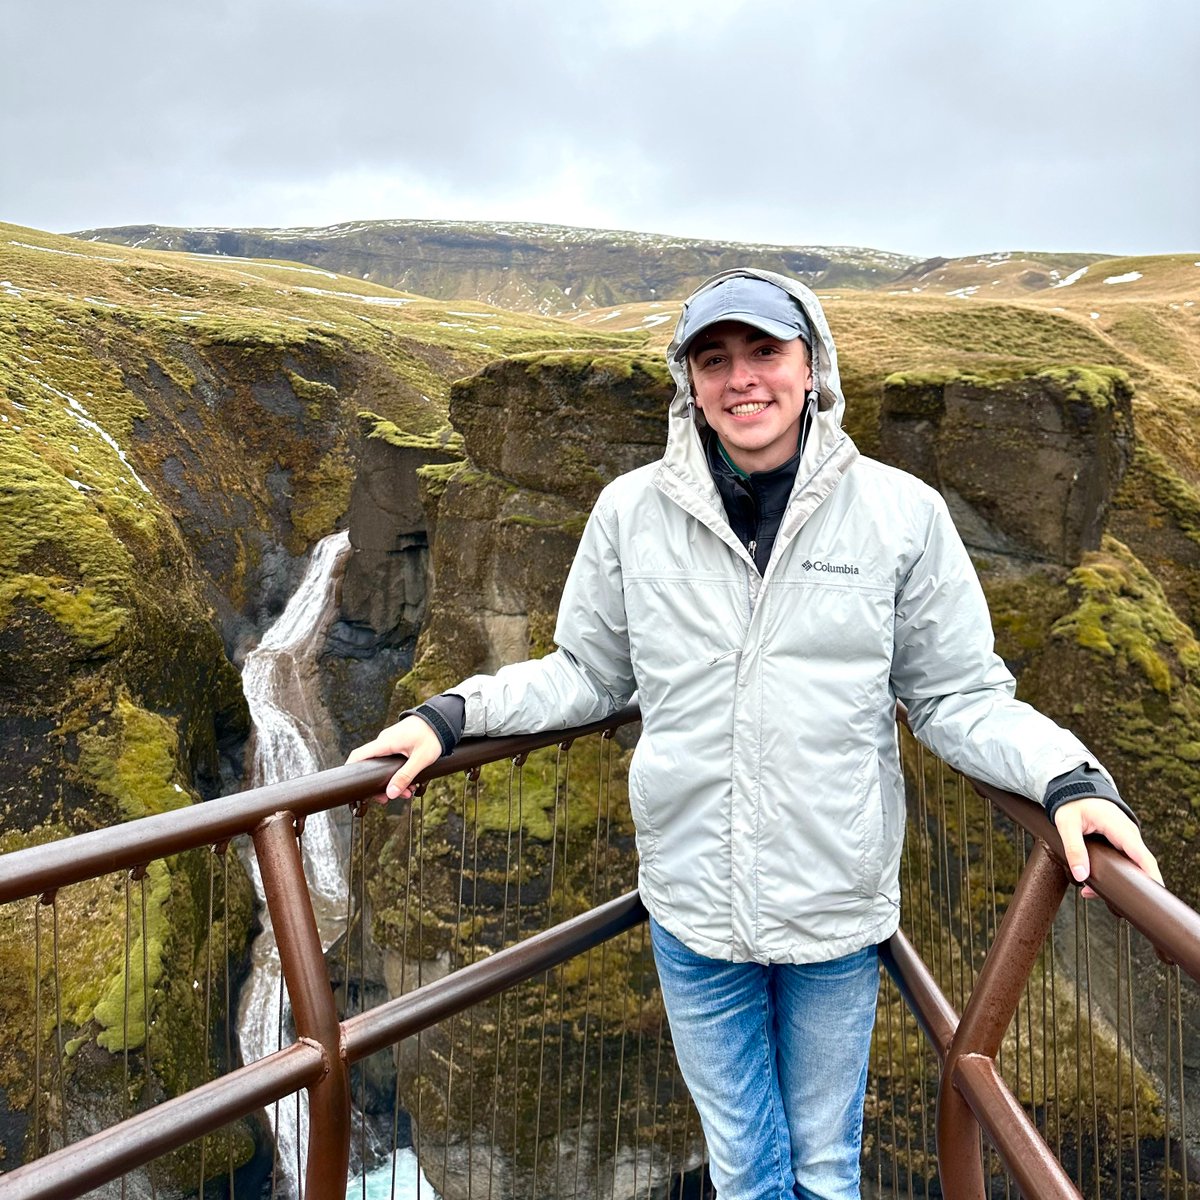 Congratulations to @trent_dilka (2021 BS, Environmental Science)!! Trent has won a Fulbright research grant to Nigeria, for work on a community-based participatory research project to explore the intersection of urban agriculture and inclusive food security policy. #Fulbright